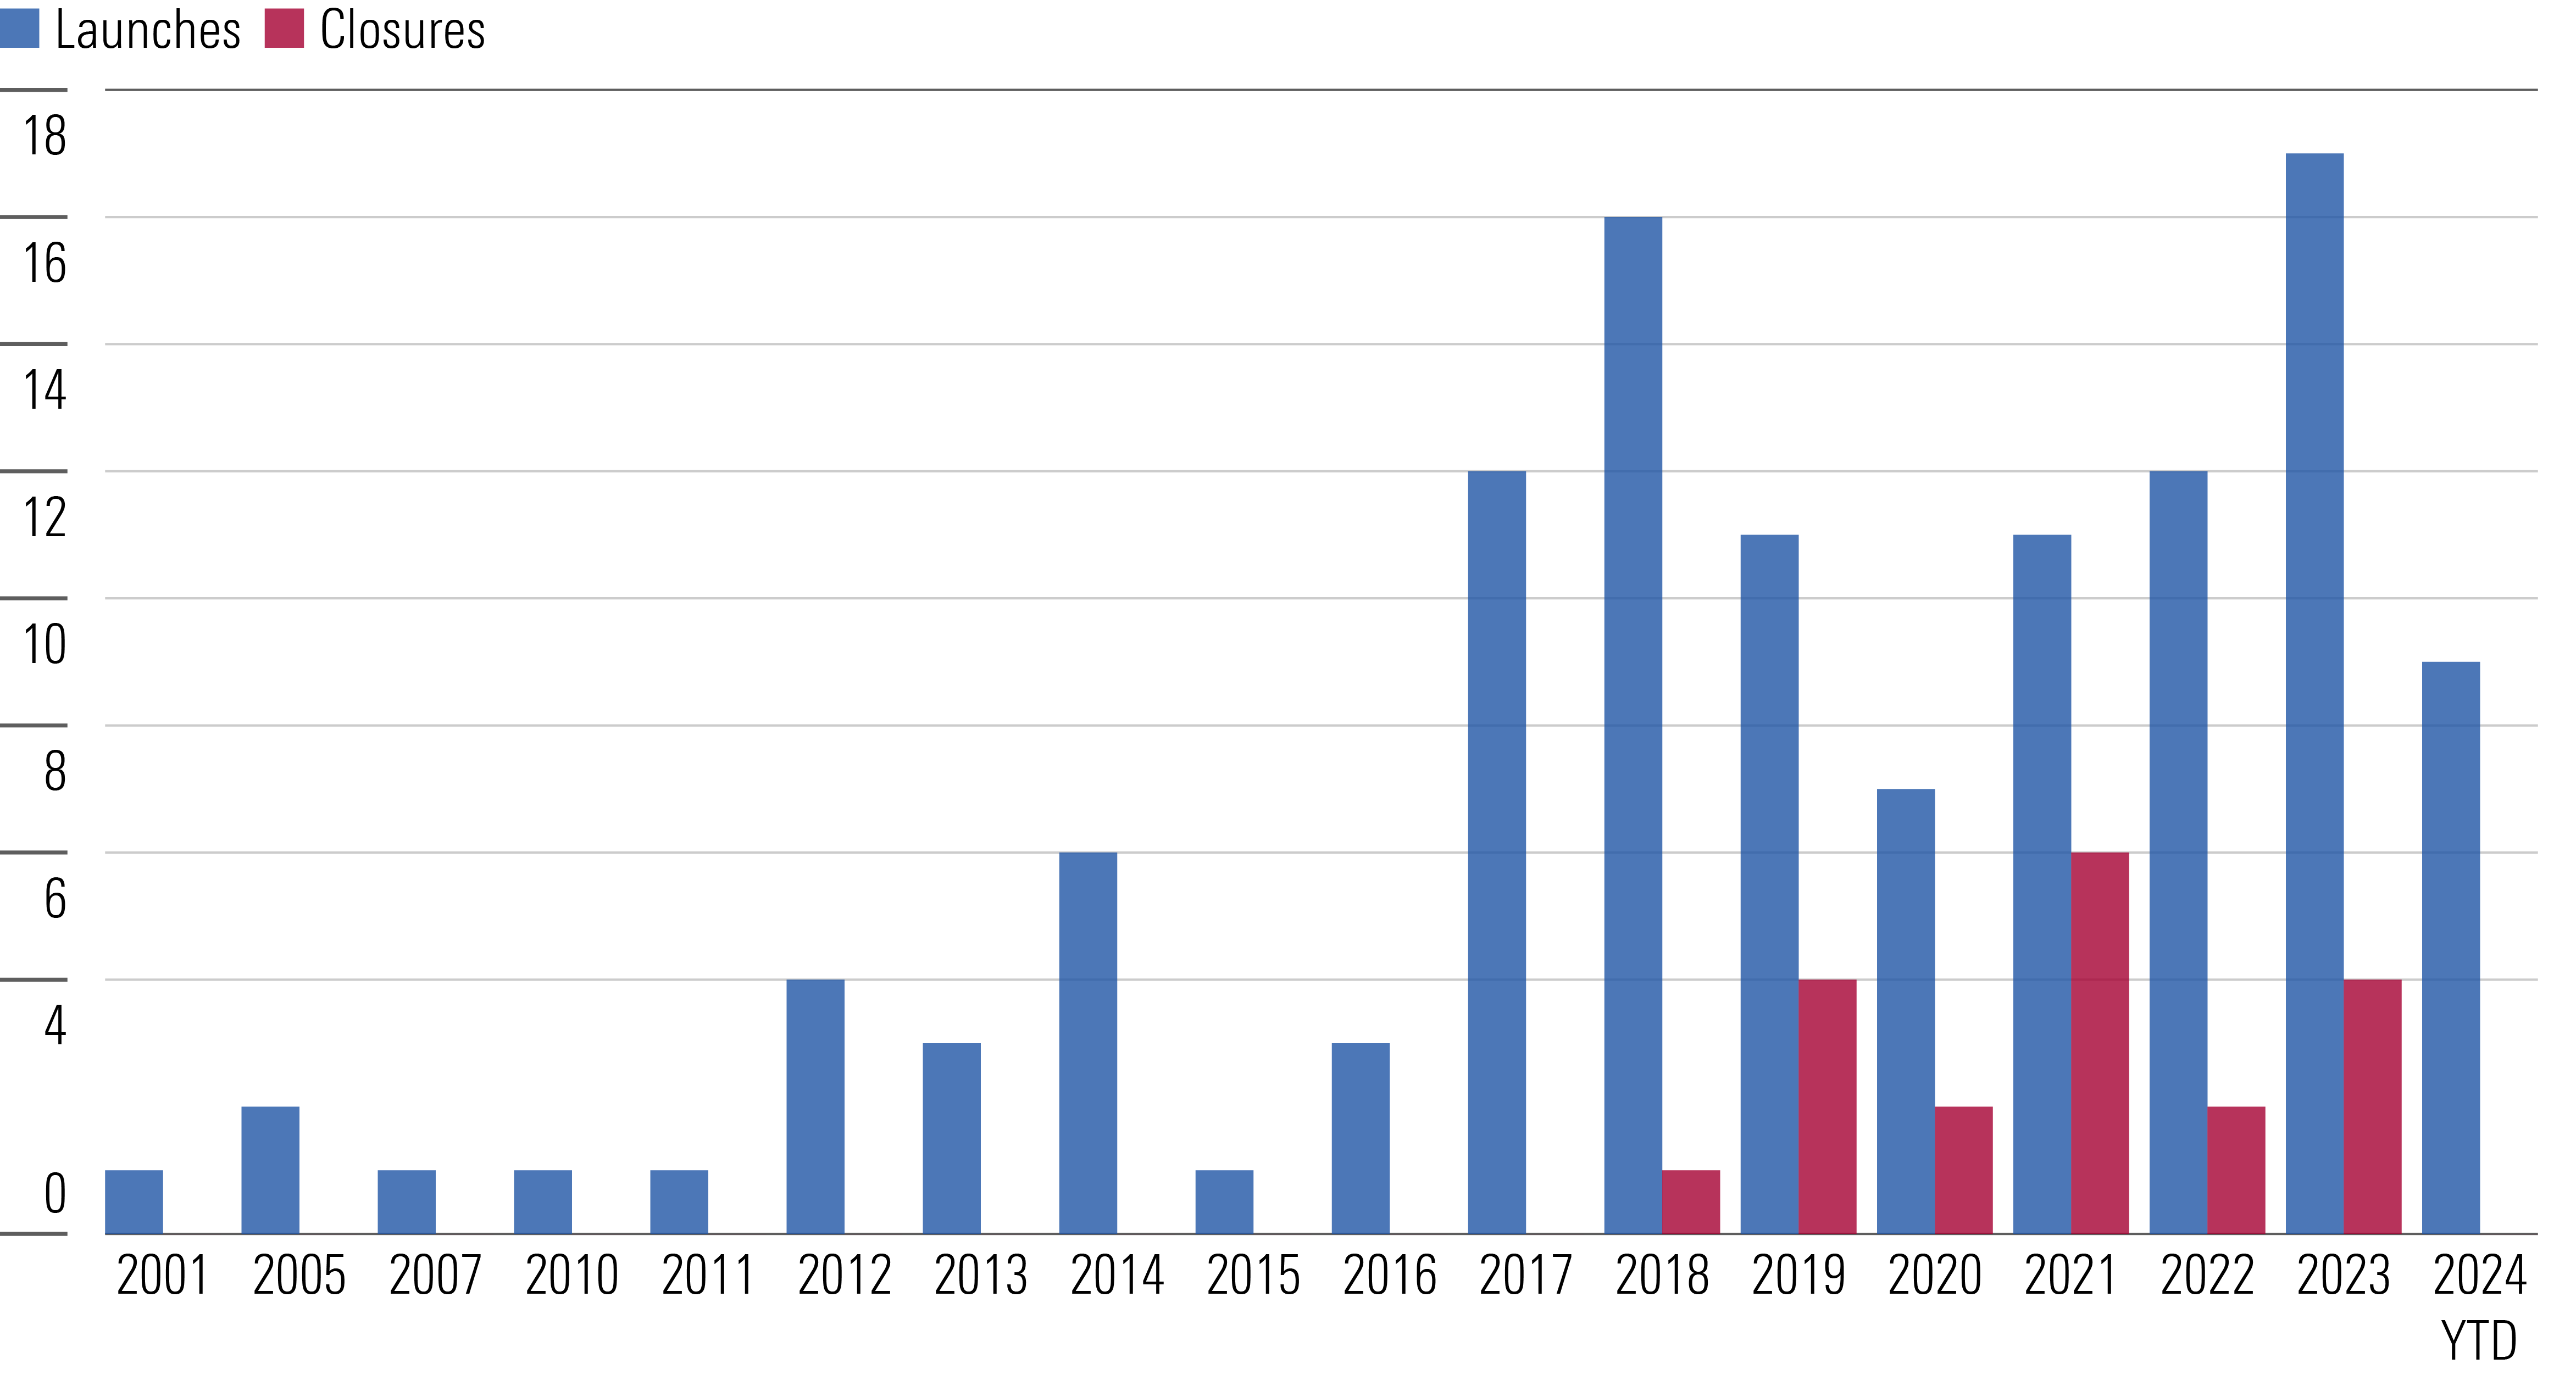 Interval fund launches were minimal from 2001 to 2016, and only went above double digits starting in 2017. Launches since 2017 have been much more frequent.